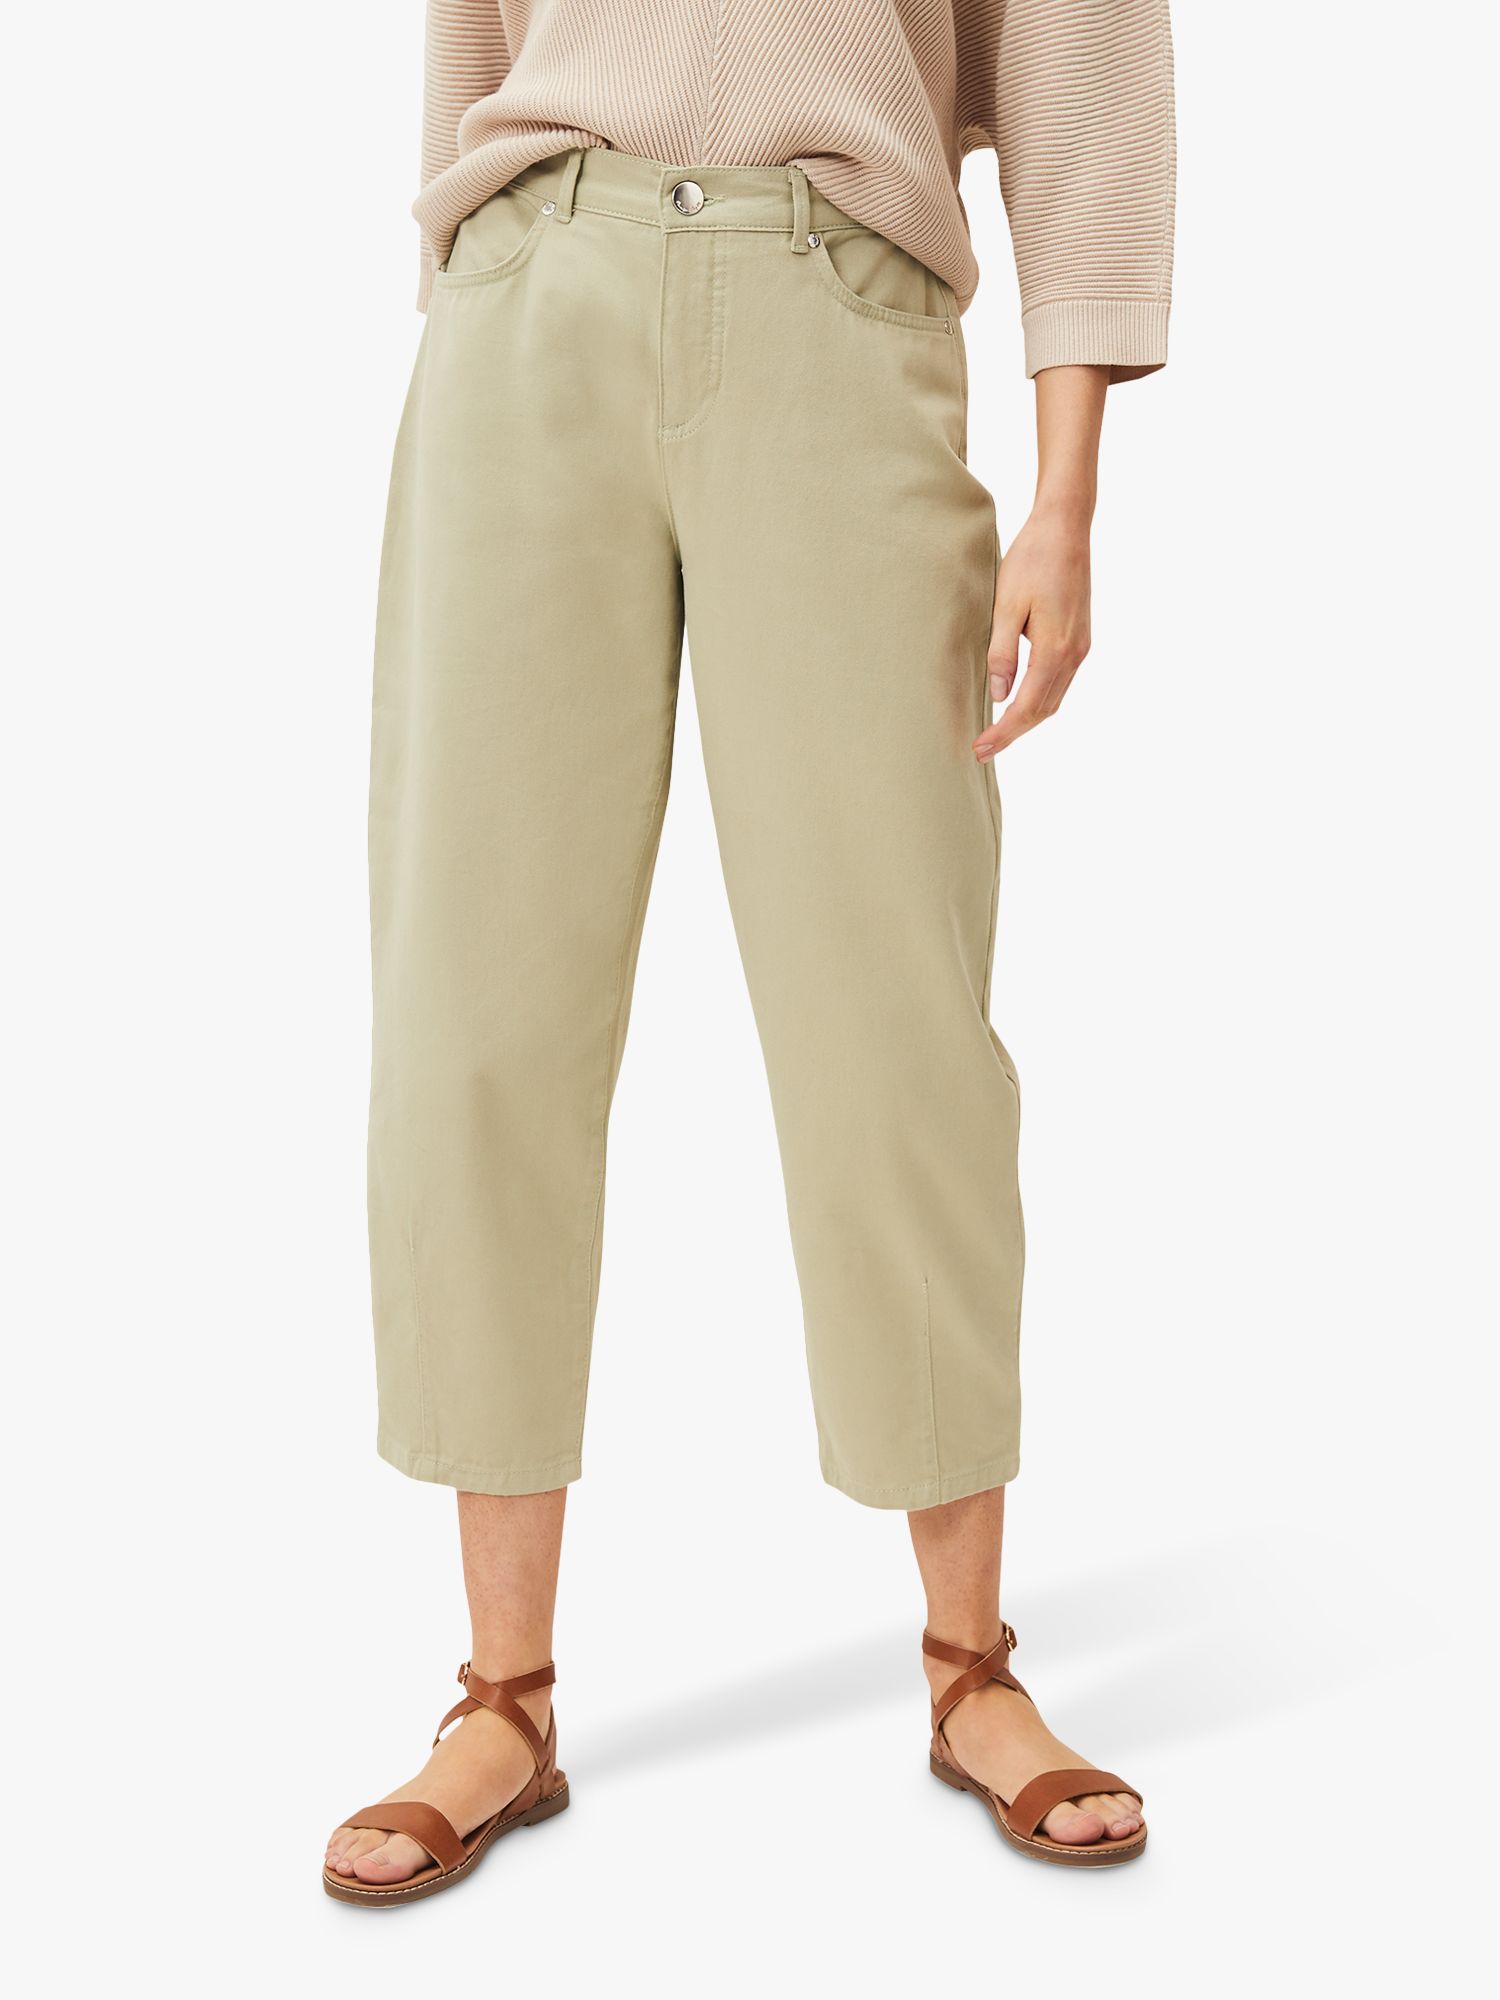 Phase Eight Romilly Waist Jeans, Sage Green at John Lewis & Partners